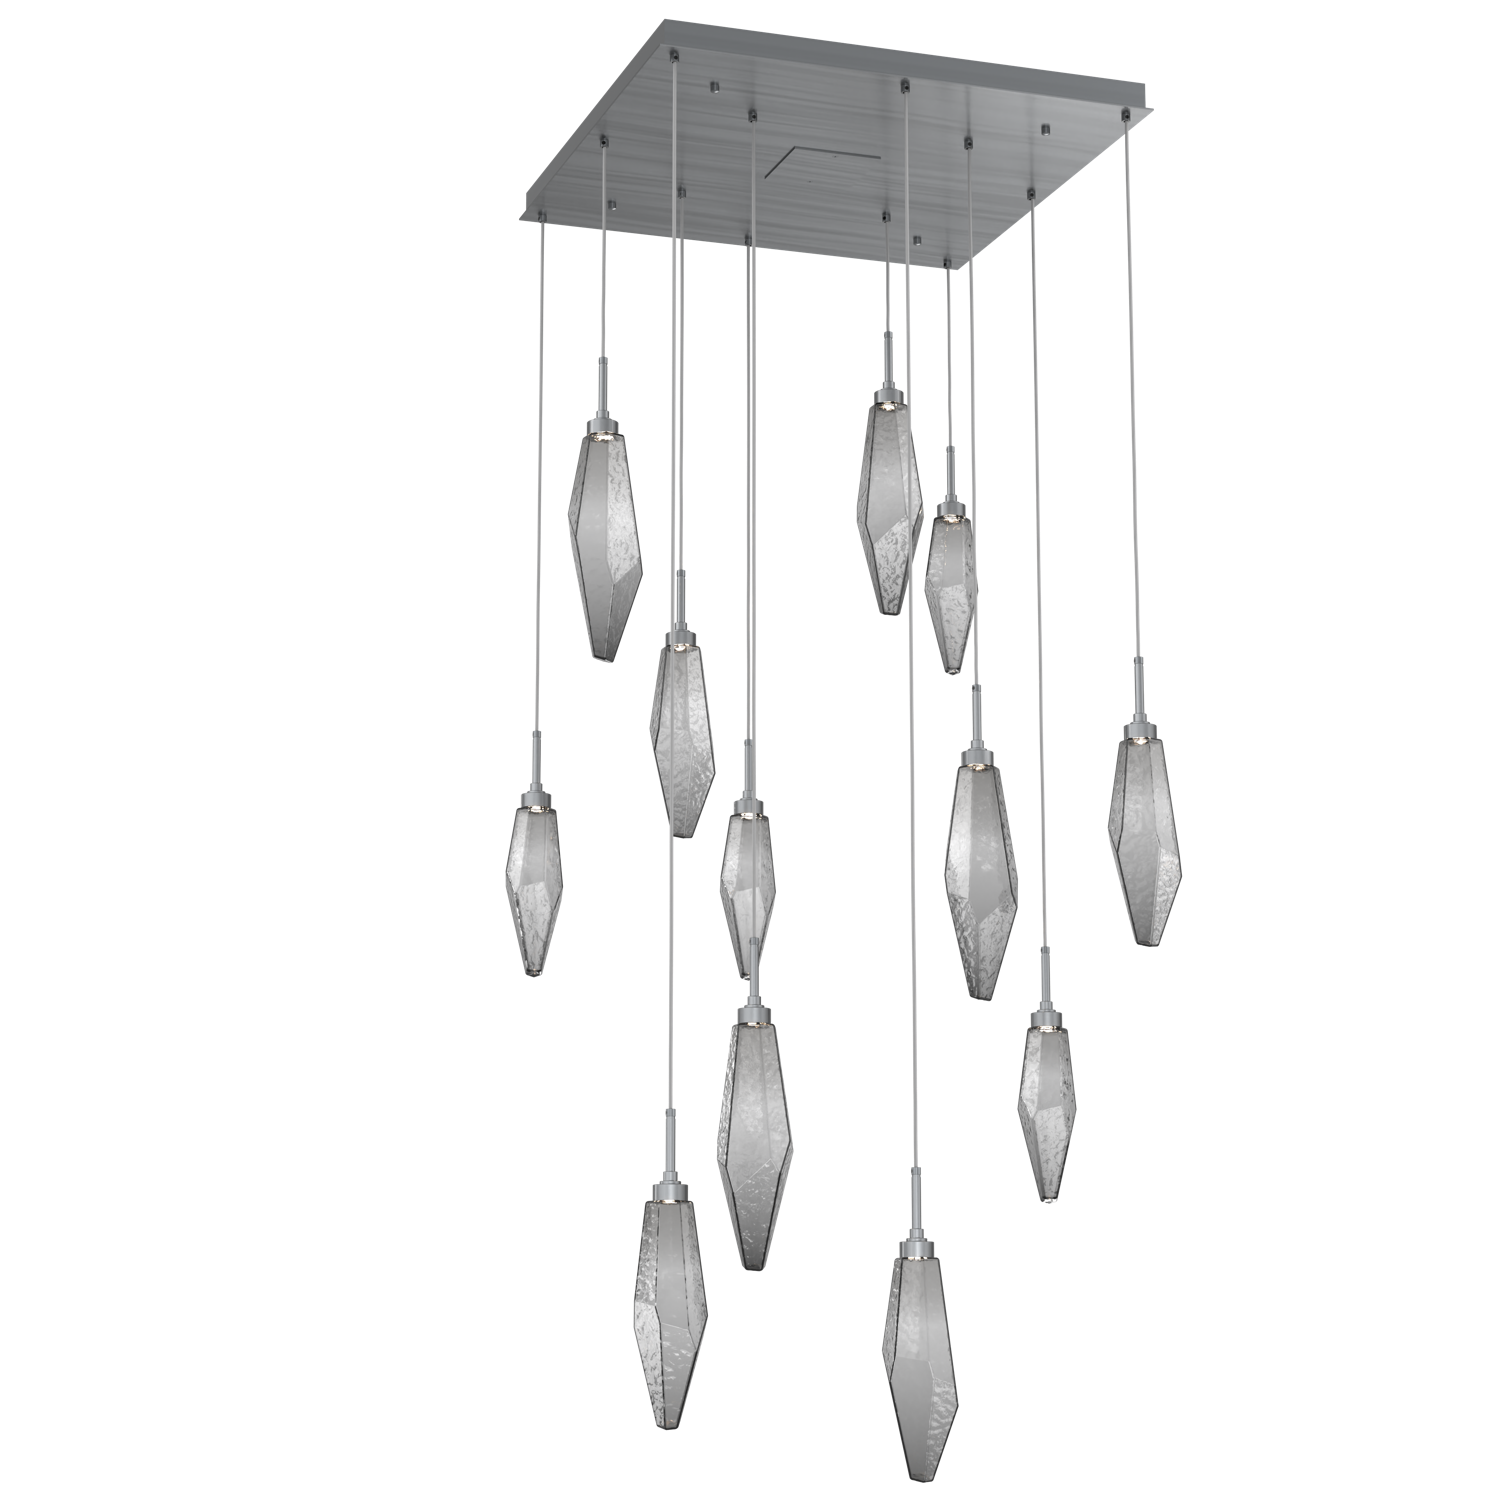 CHB0050-12-GM-CS-Hammerton-Studio-Rock-Crystal-12-light-square-pendant-chandelier-with-gunmetal-finish-and-chilled-smoke-glass-shades-and-LED-lamping